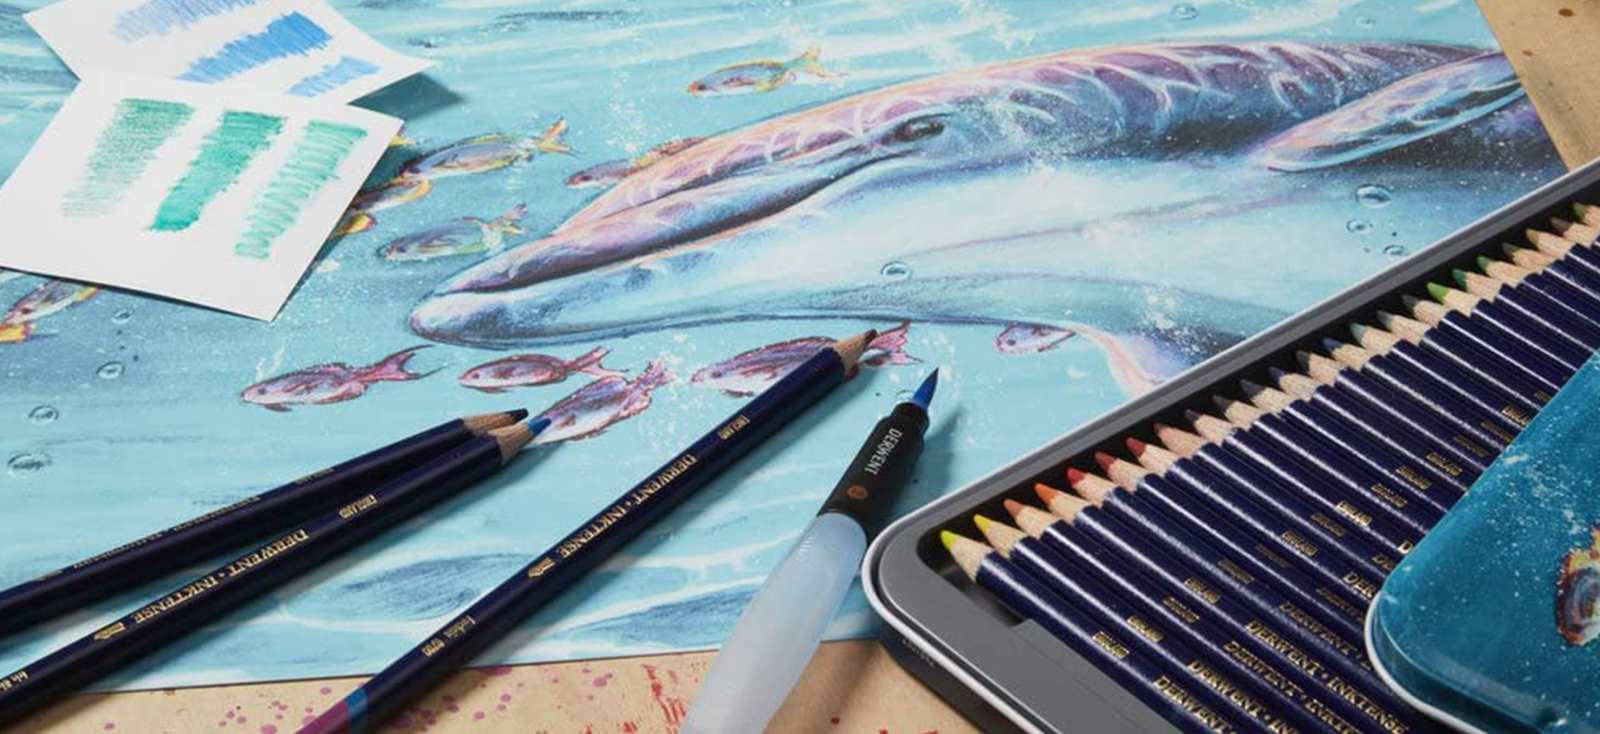 Derwent Inktense pencils lying next to dolphin drawing and waterbrush